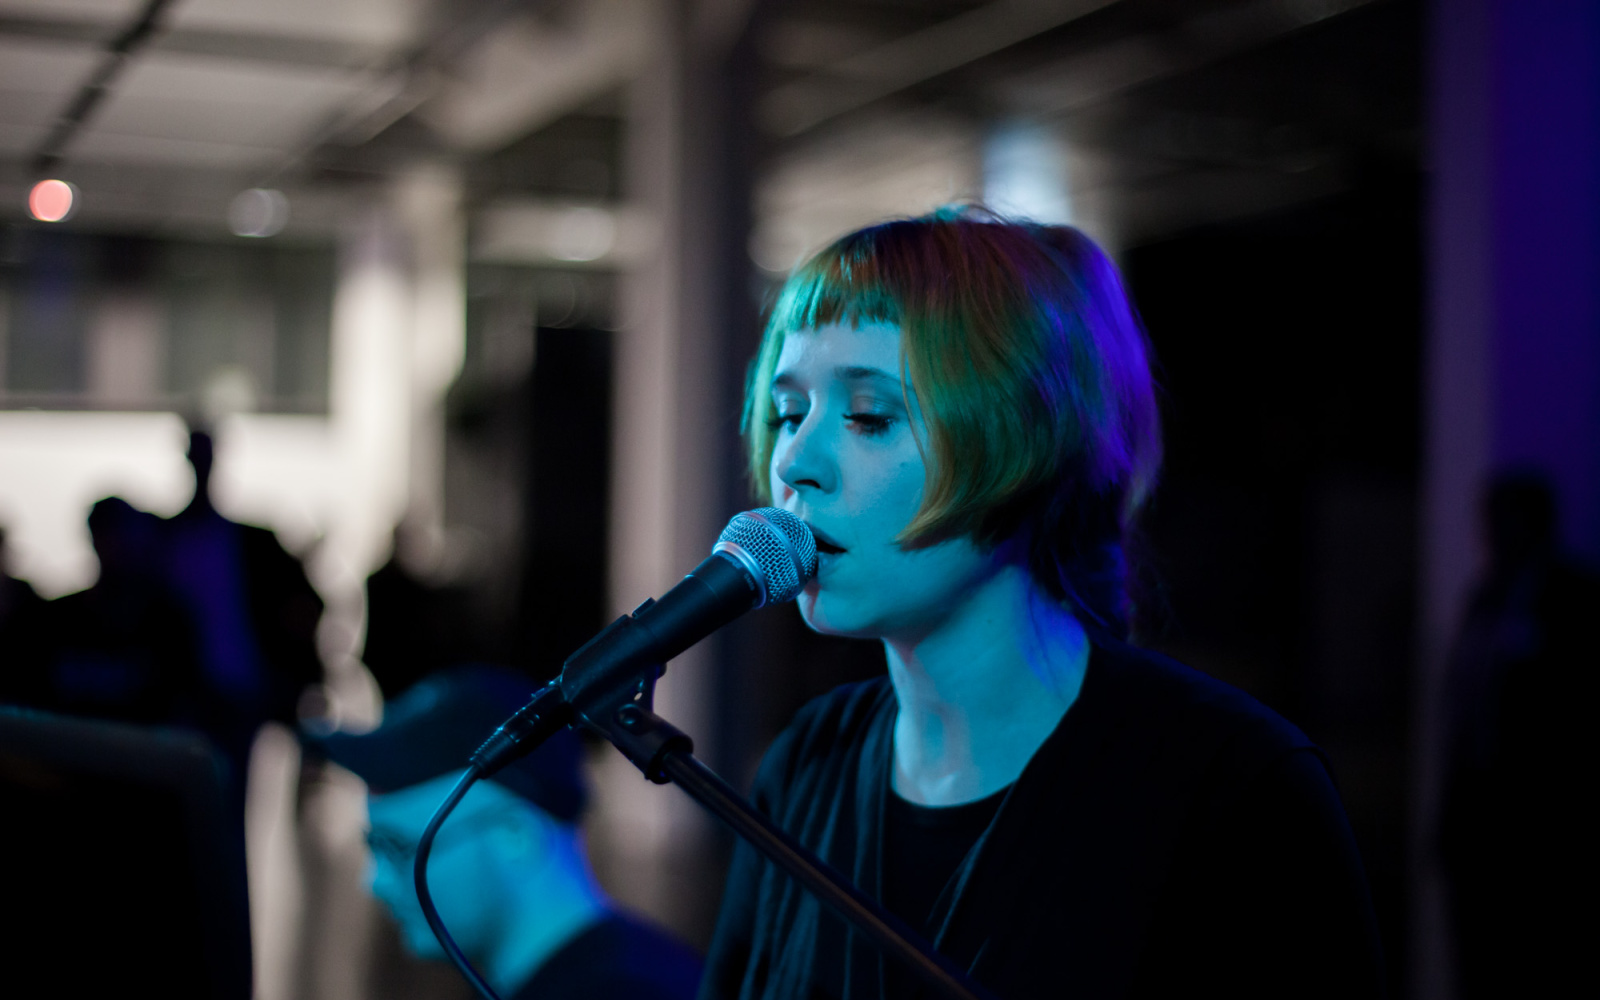 Singing woman at a microphone. The scene is lit by blue lights.